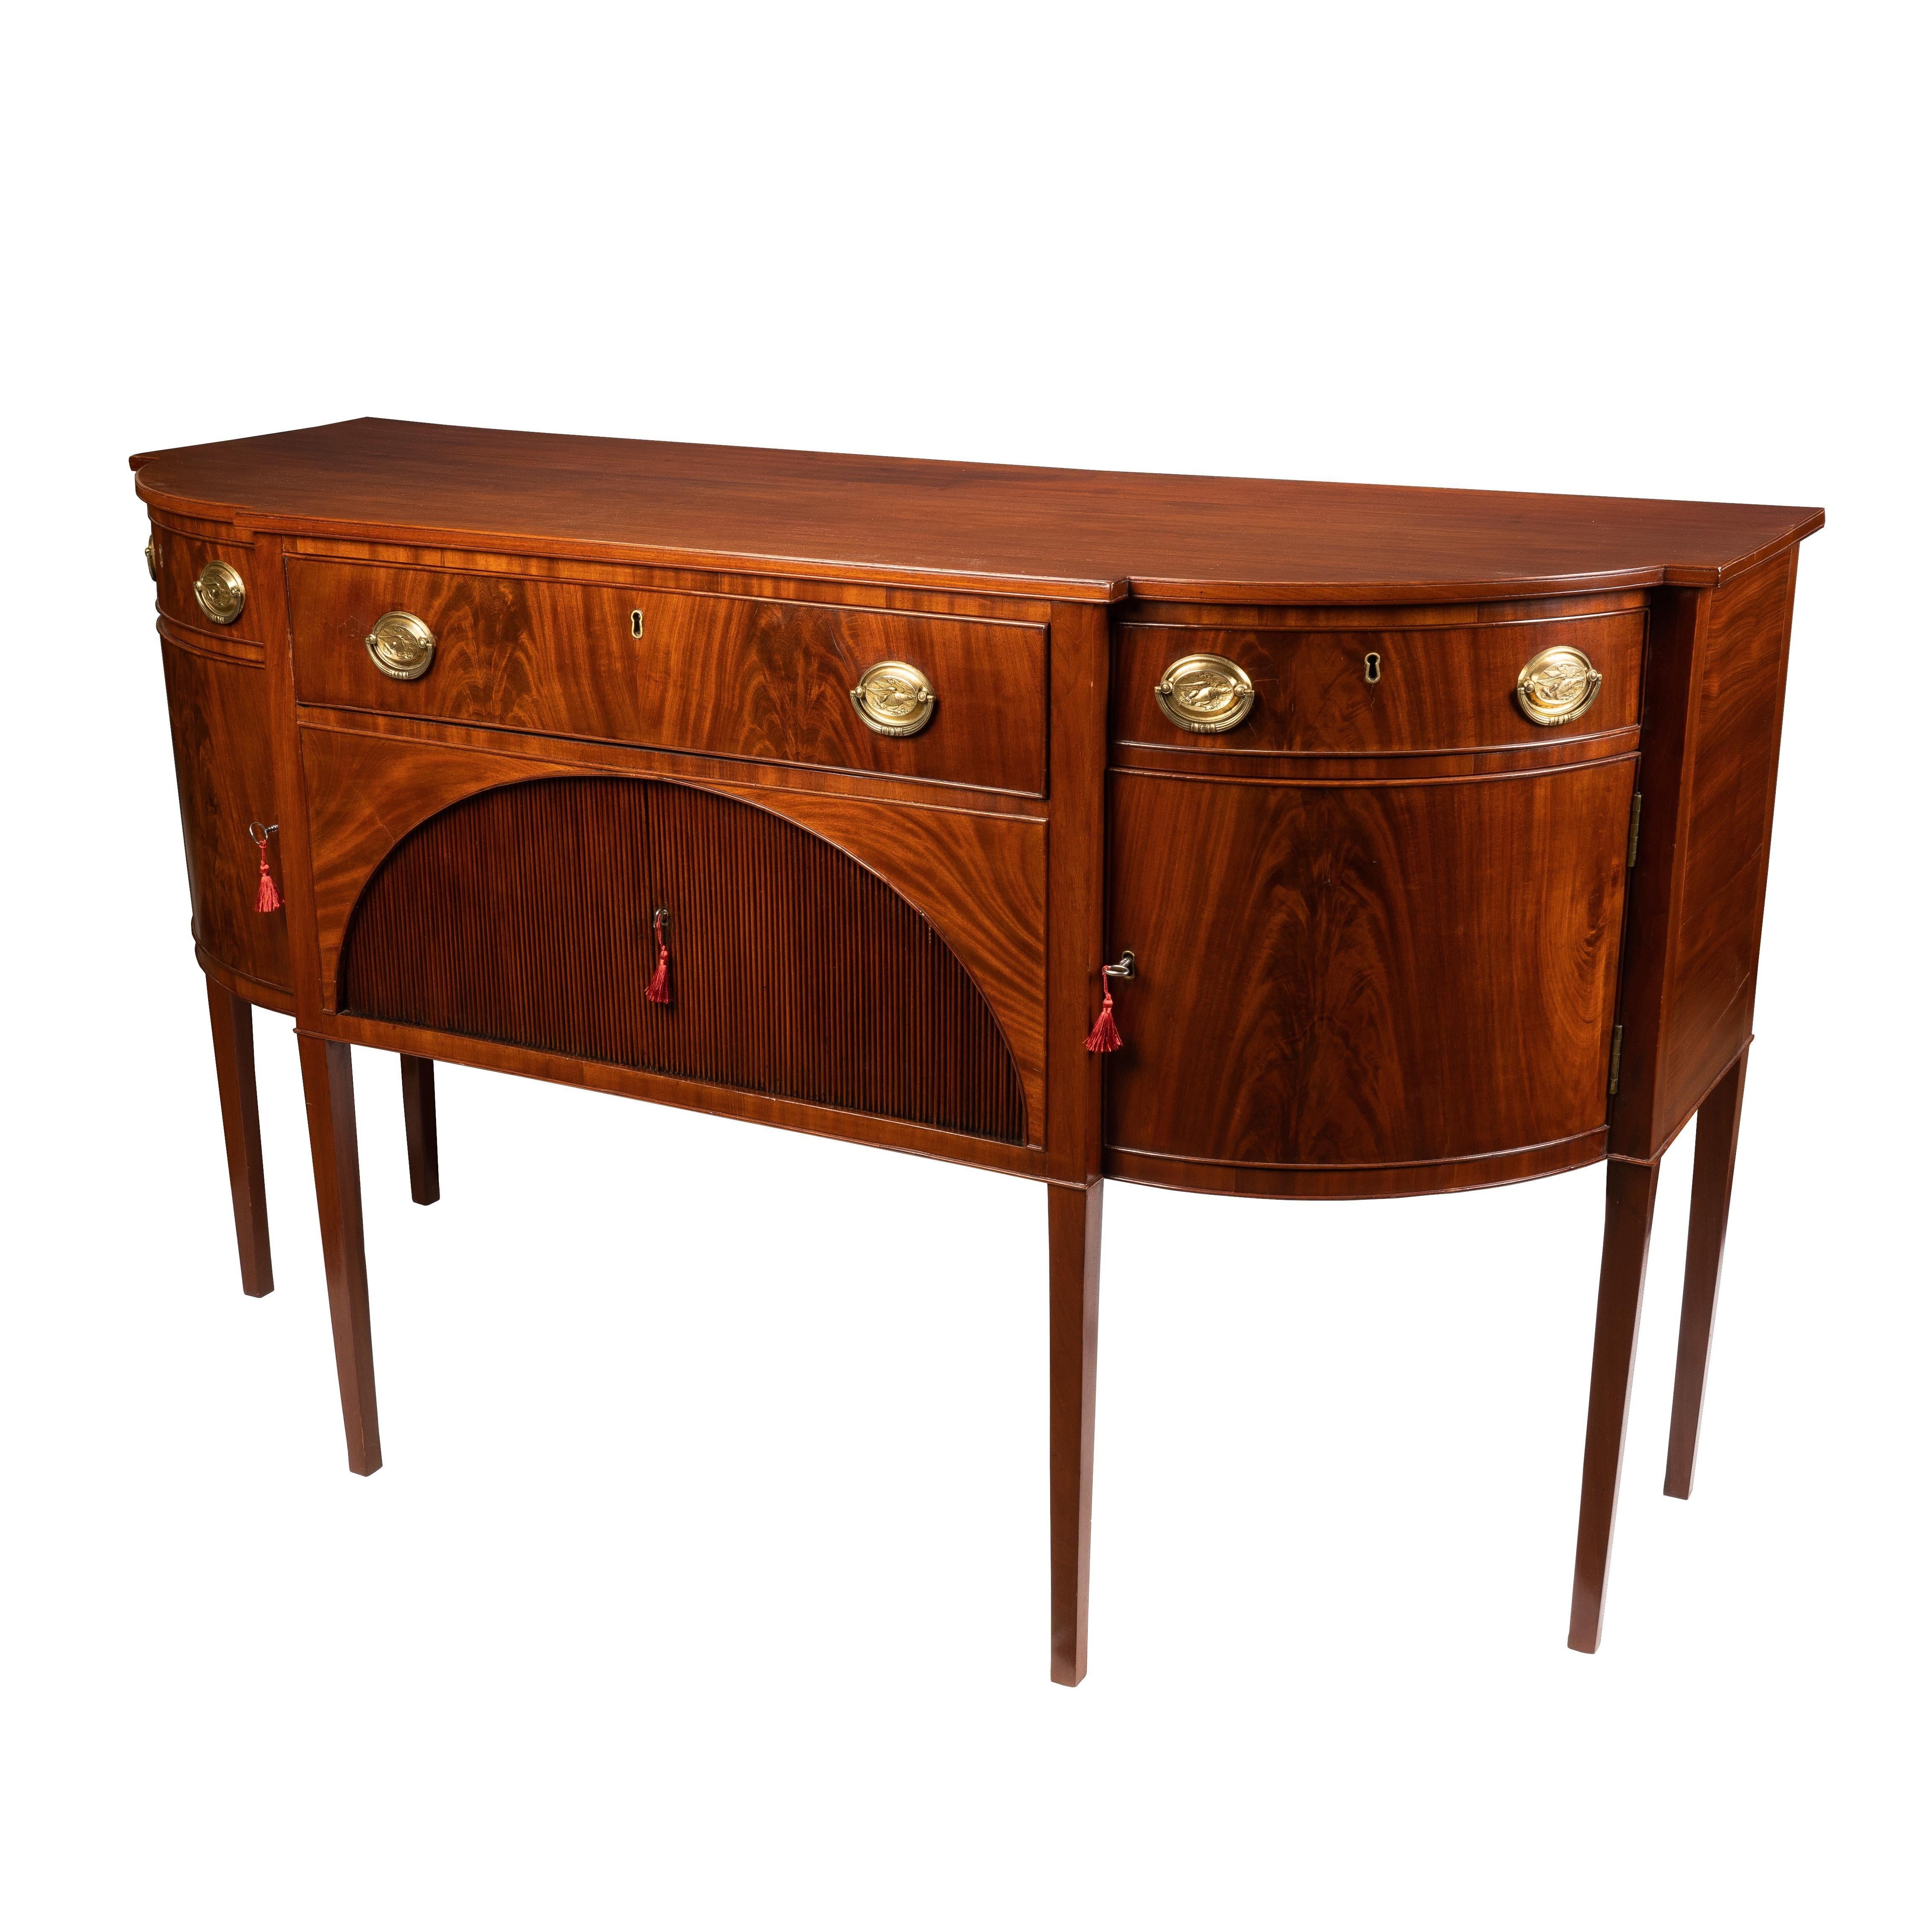 American Hepplewhite side board of mahogany and matched figured mahogany veneers. Northern White Pine secondary wood. The cabinet retains its original stamped brass oval back plates & cast bails. The case is centered on a lunette opening with